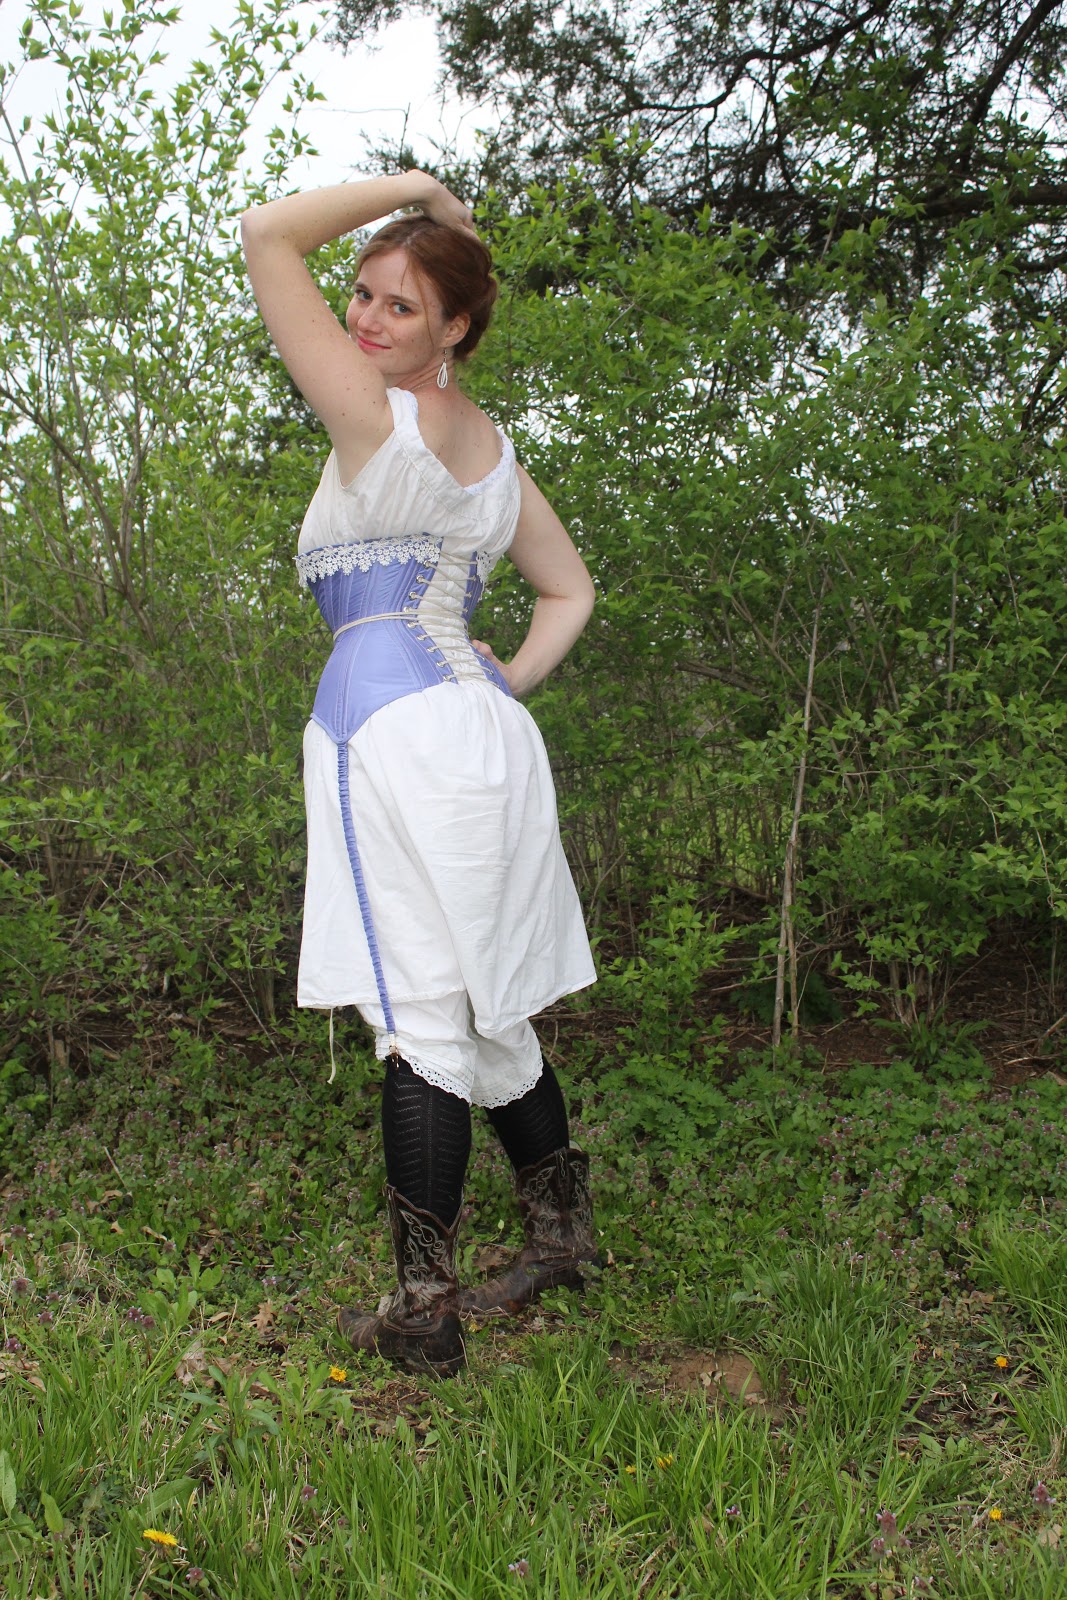 The Sewing Goatherd: Attempting to Make an S-Bend Corset